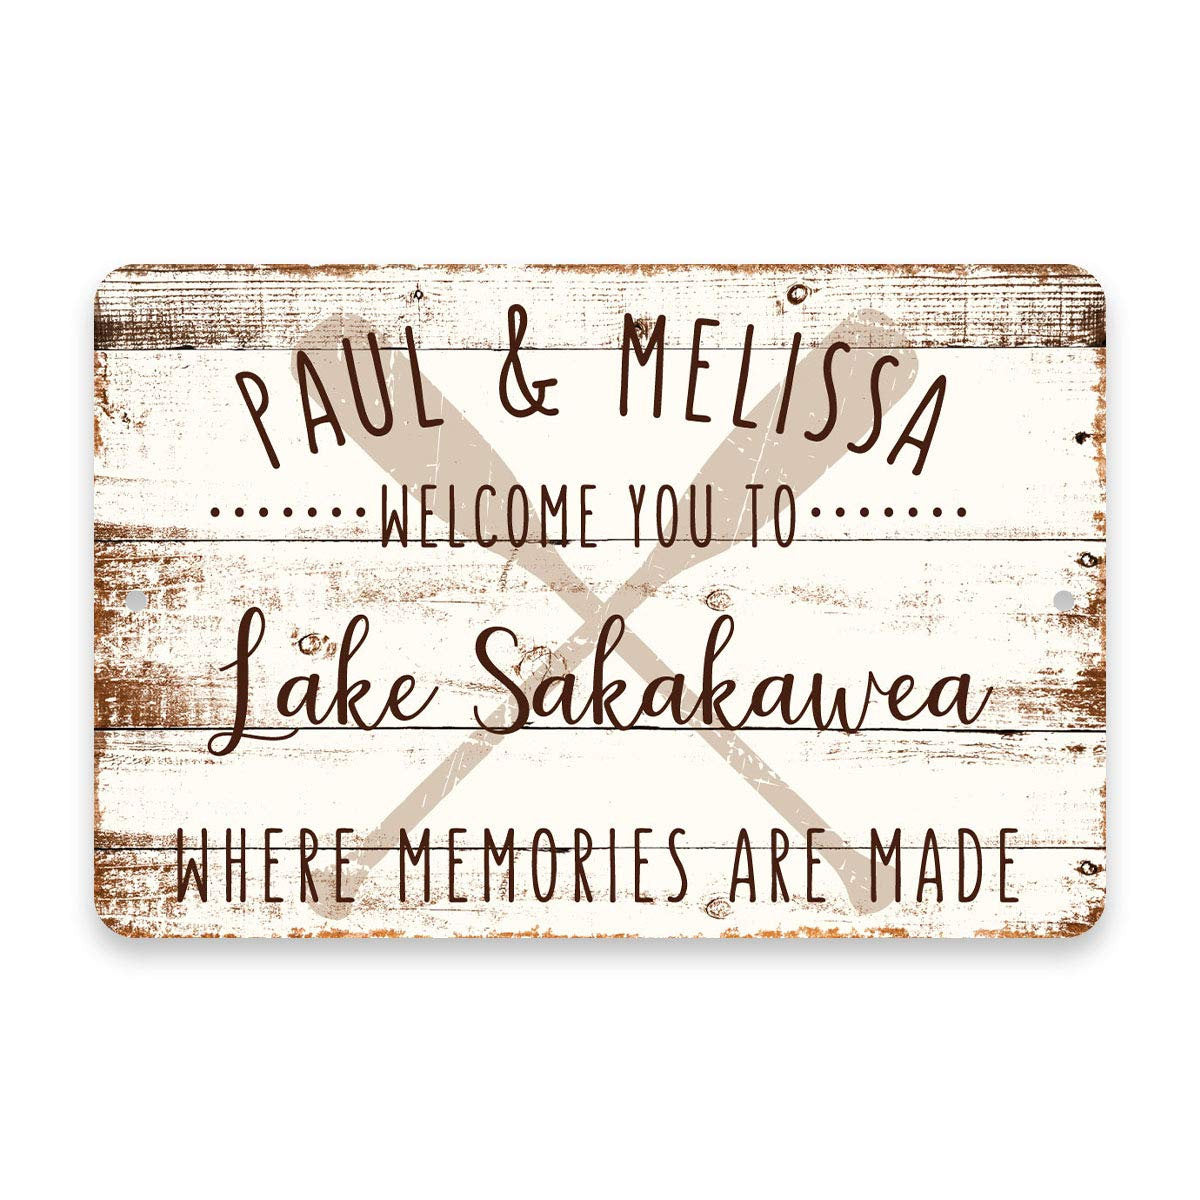 Personalized Welcome to Lake Sakakawea Where Memories are Made Sign - 8 X 12 Metal Sign with Wood Look